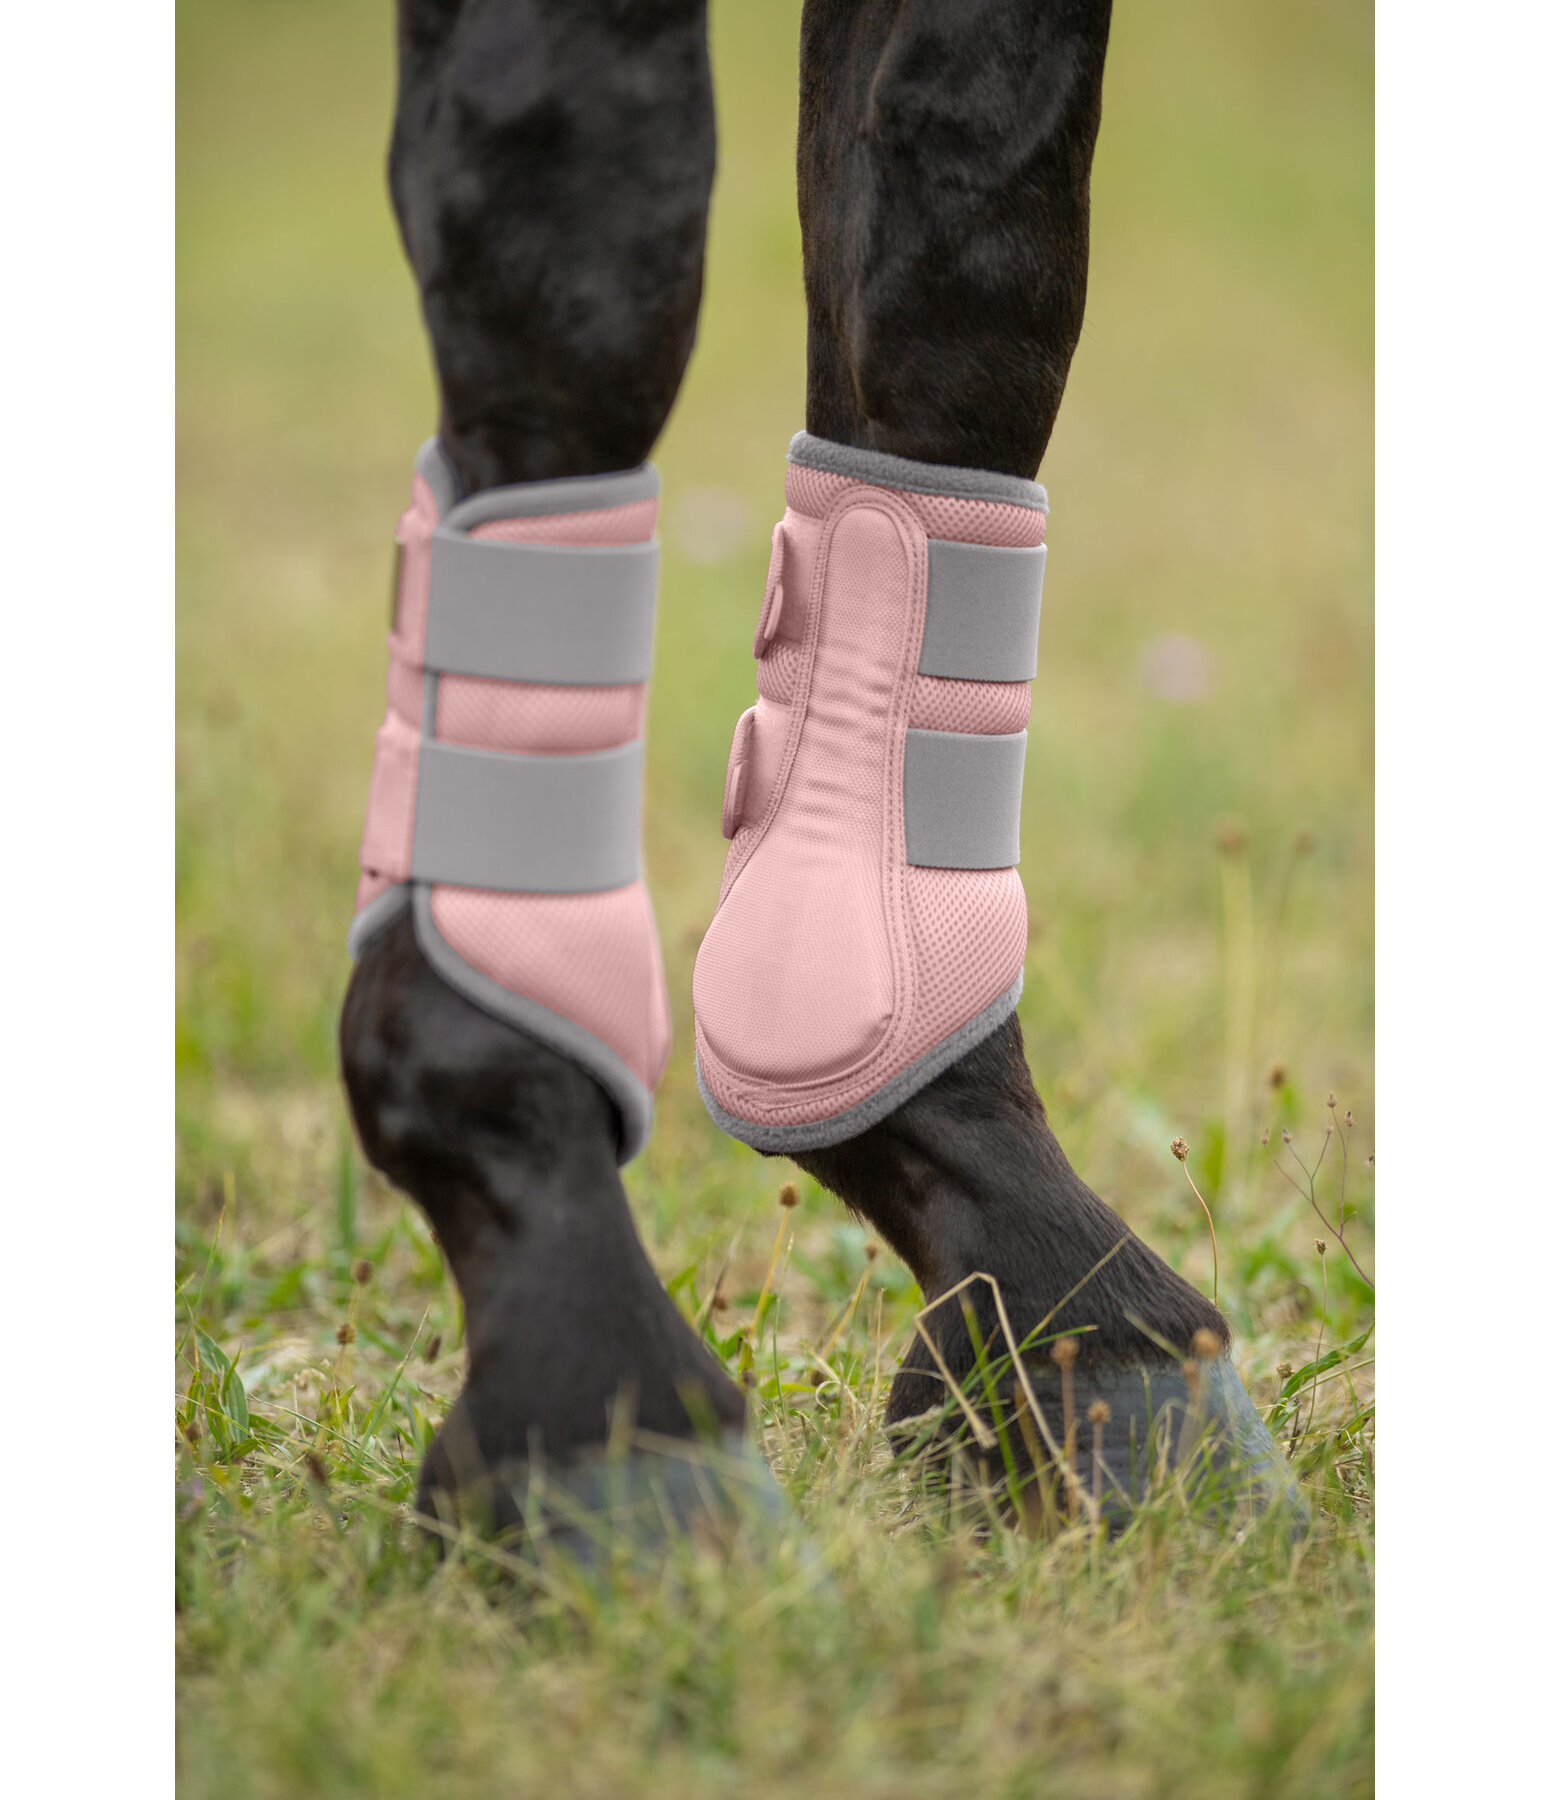 Functional Boots Swiss Design (Front Legs)